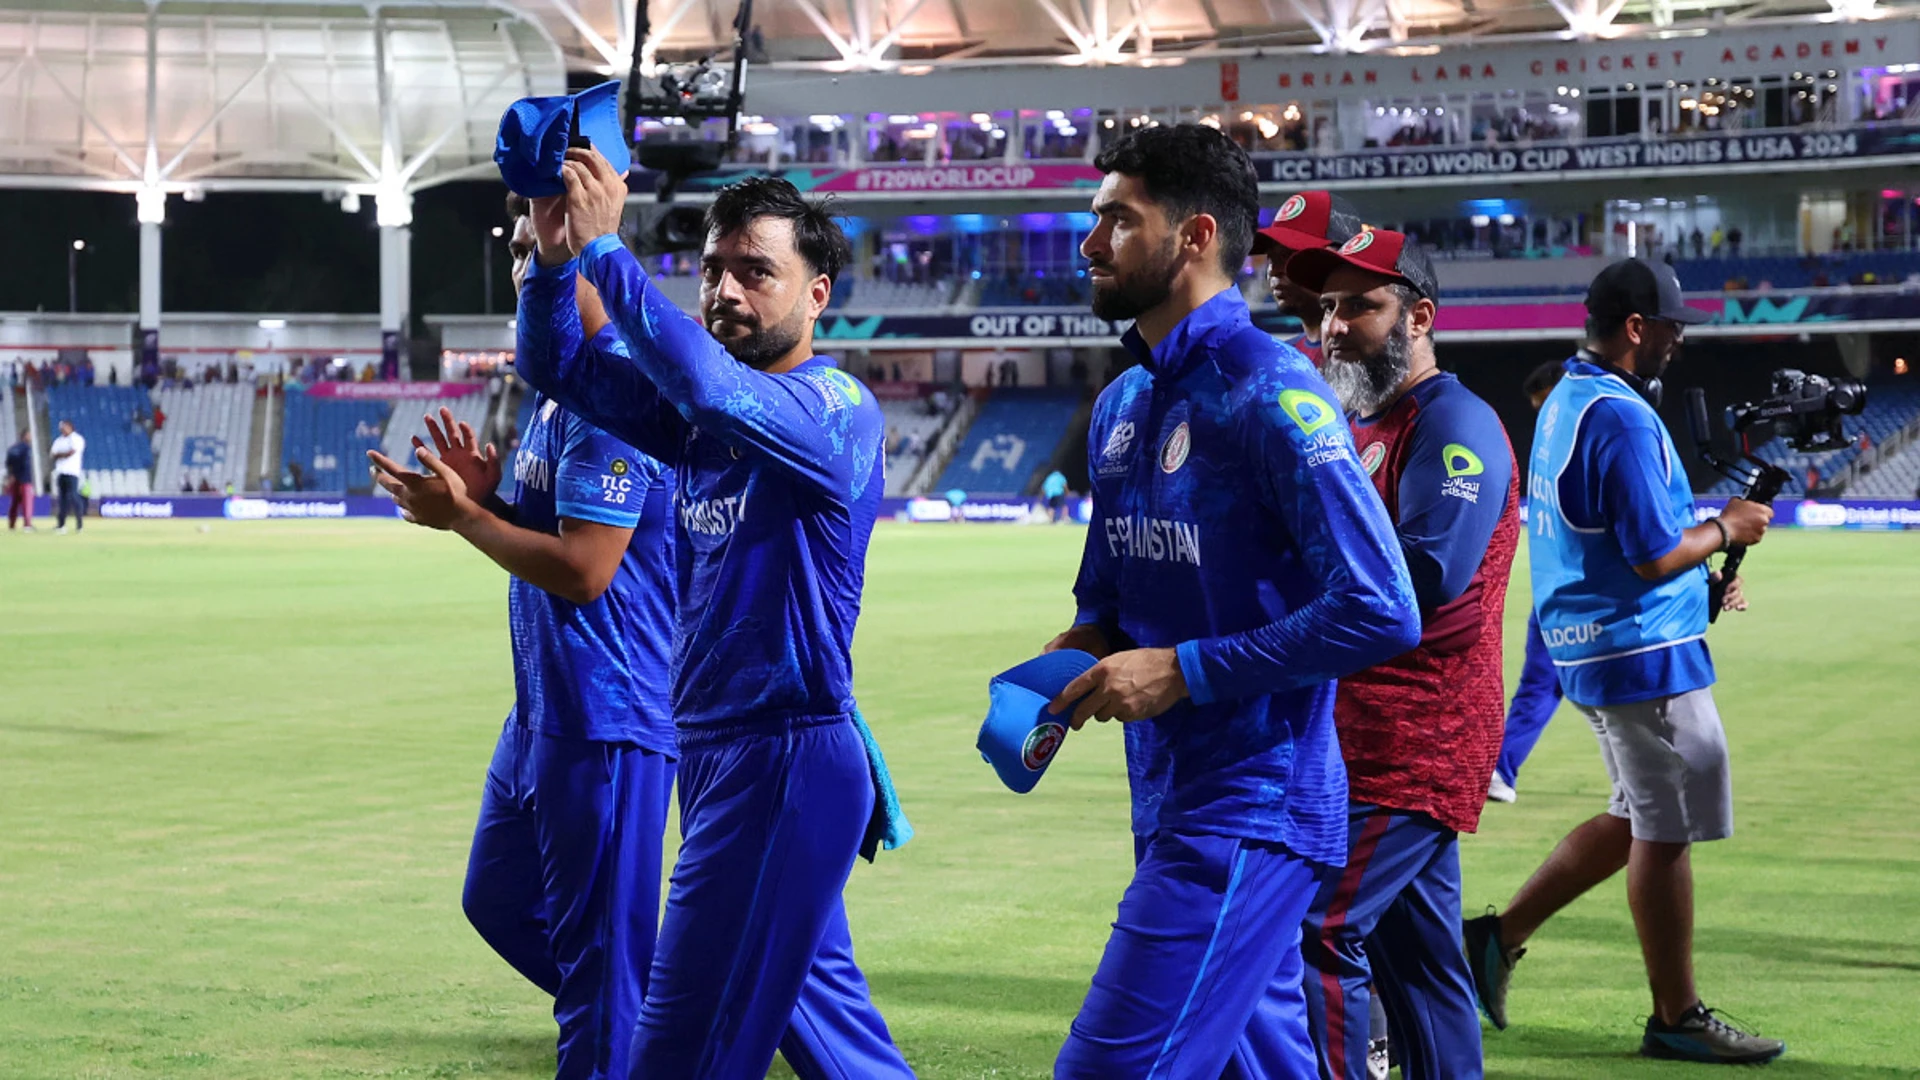 Afghans proud in defeat as fairytale World Cup run ends in semis